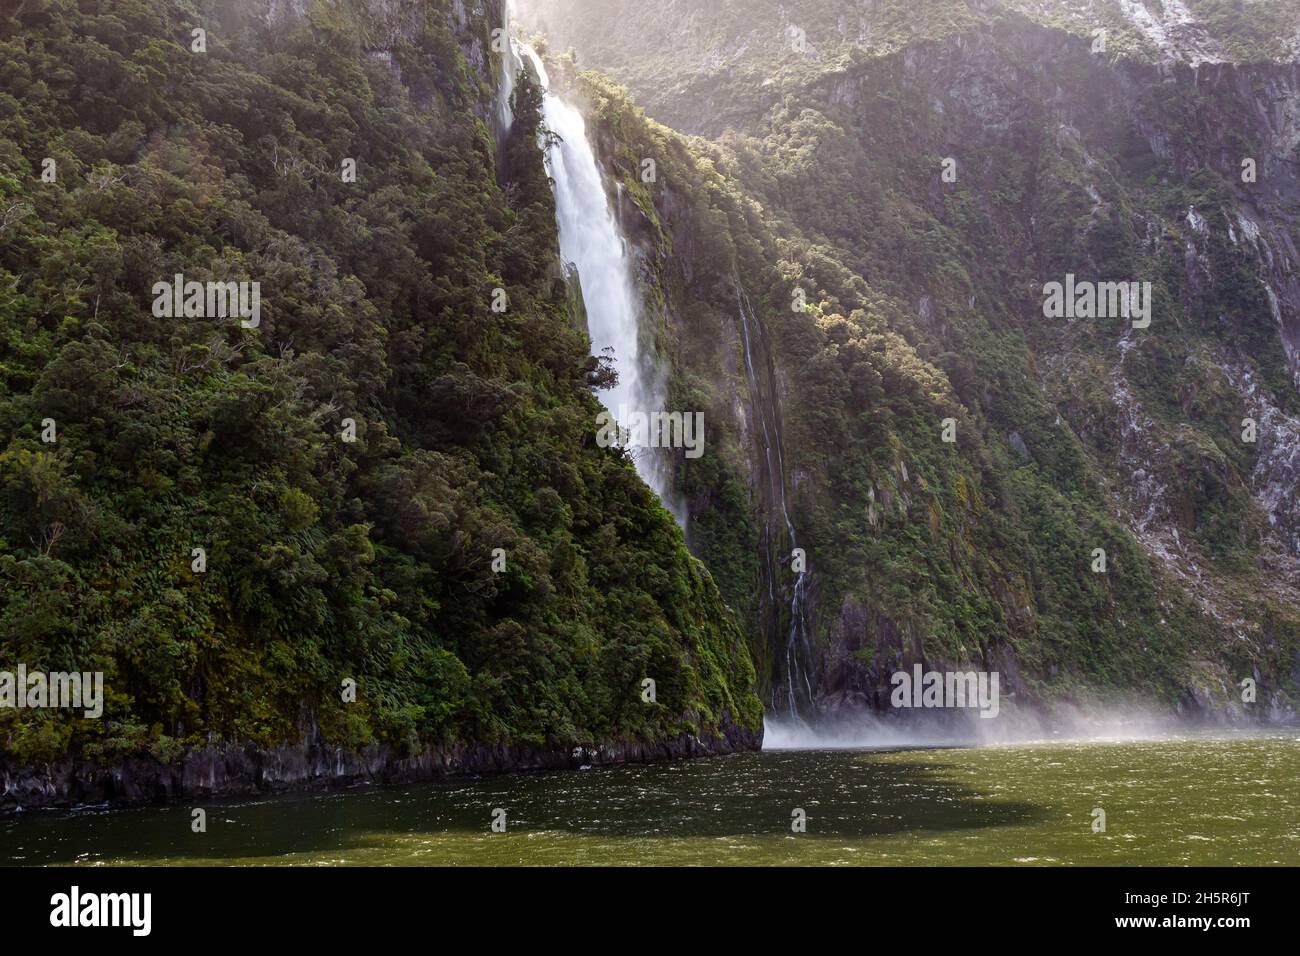 Landscape with a small waterfall and a mountain overgrown with greenery. Fiordland National Park. New Zealand Stock Photo